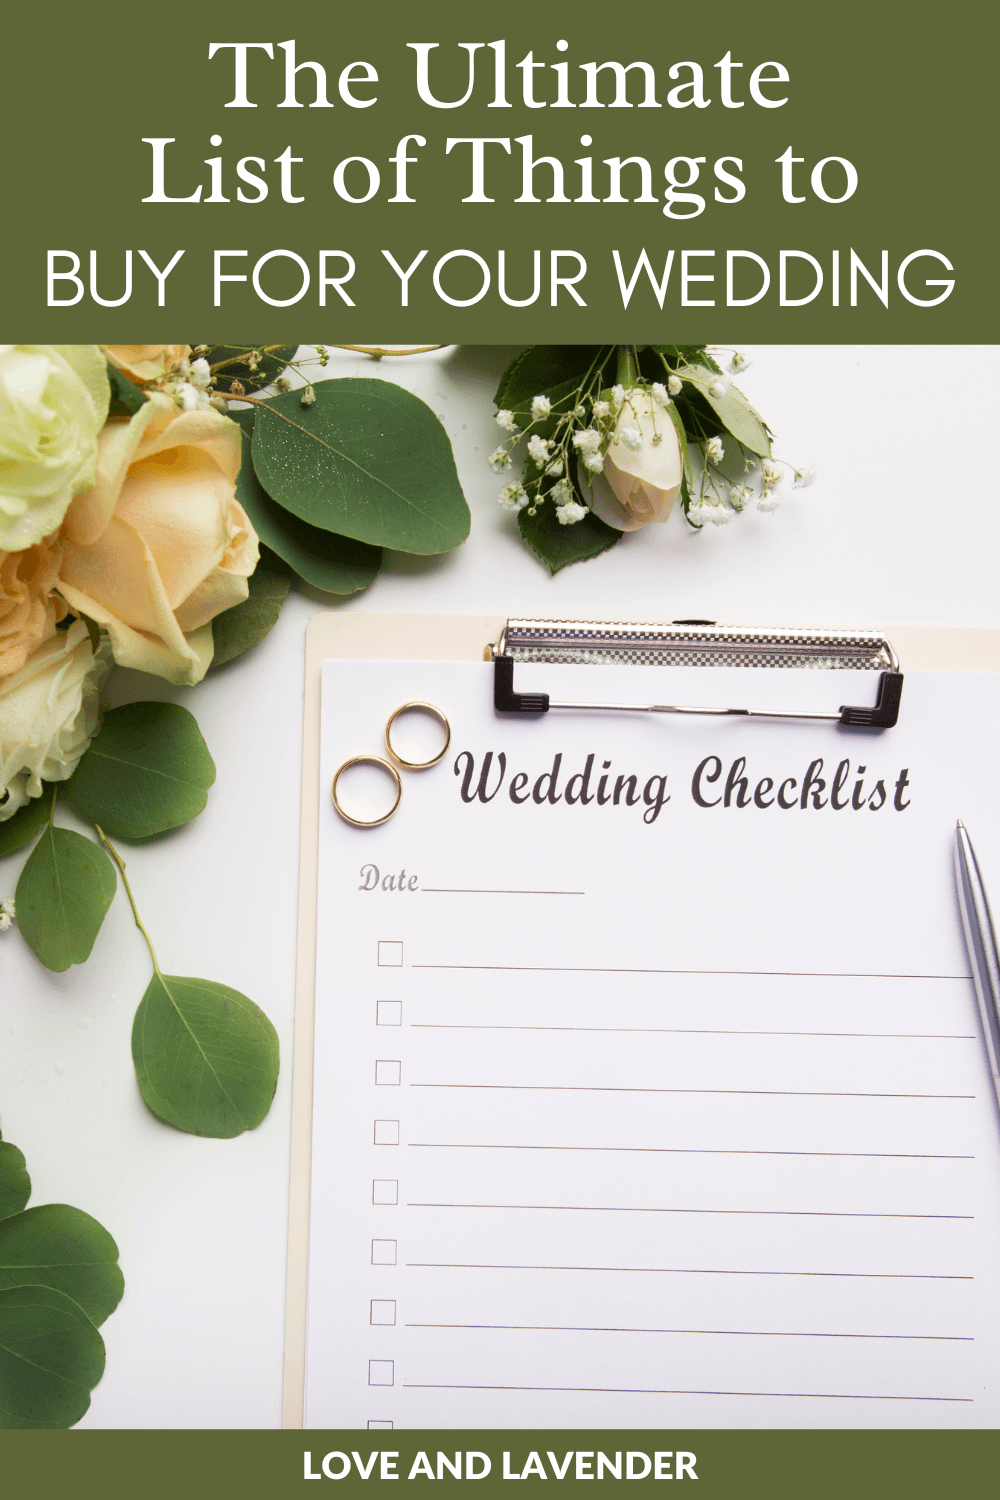 Are you planning on buying any items pertaining to your wedding? Or do you have someone in mind that is getting married? Then this is the website you need! This guide will provide you with all of the information, resources, and tips needed to successfully plan a wedding.